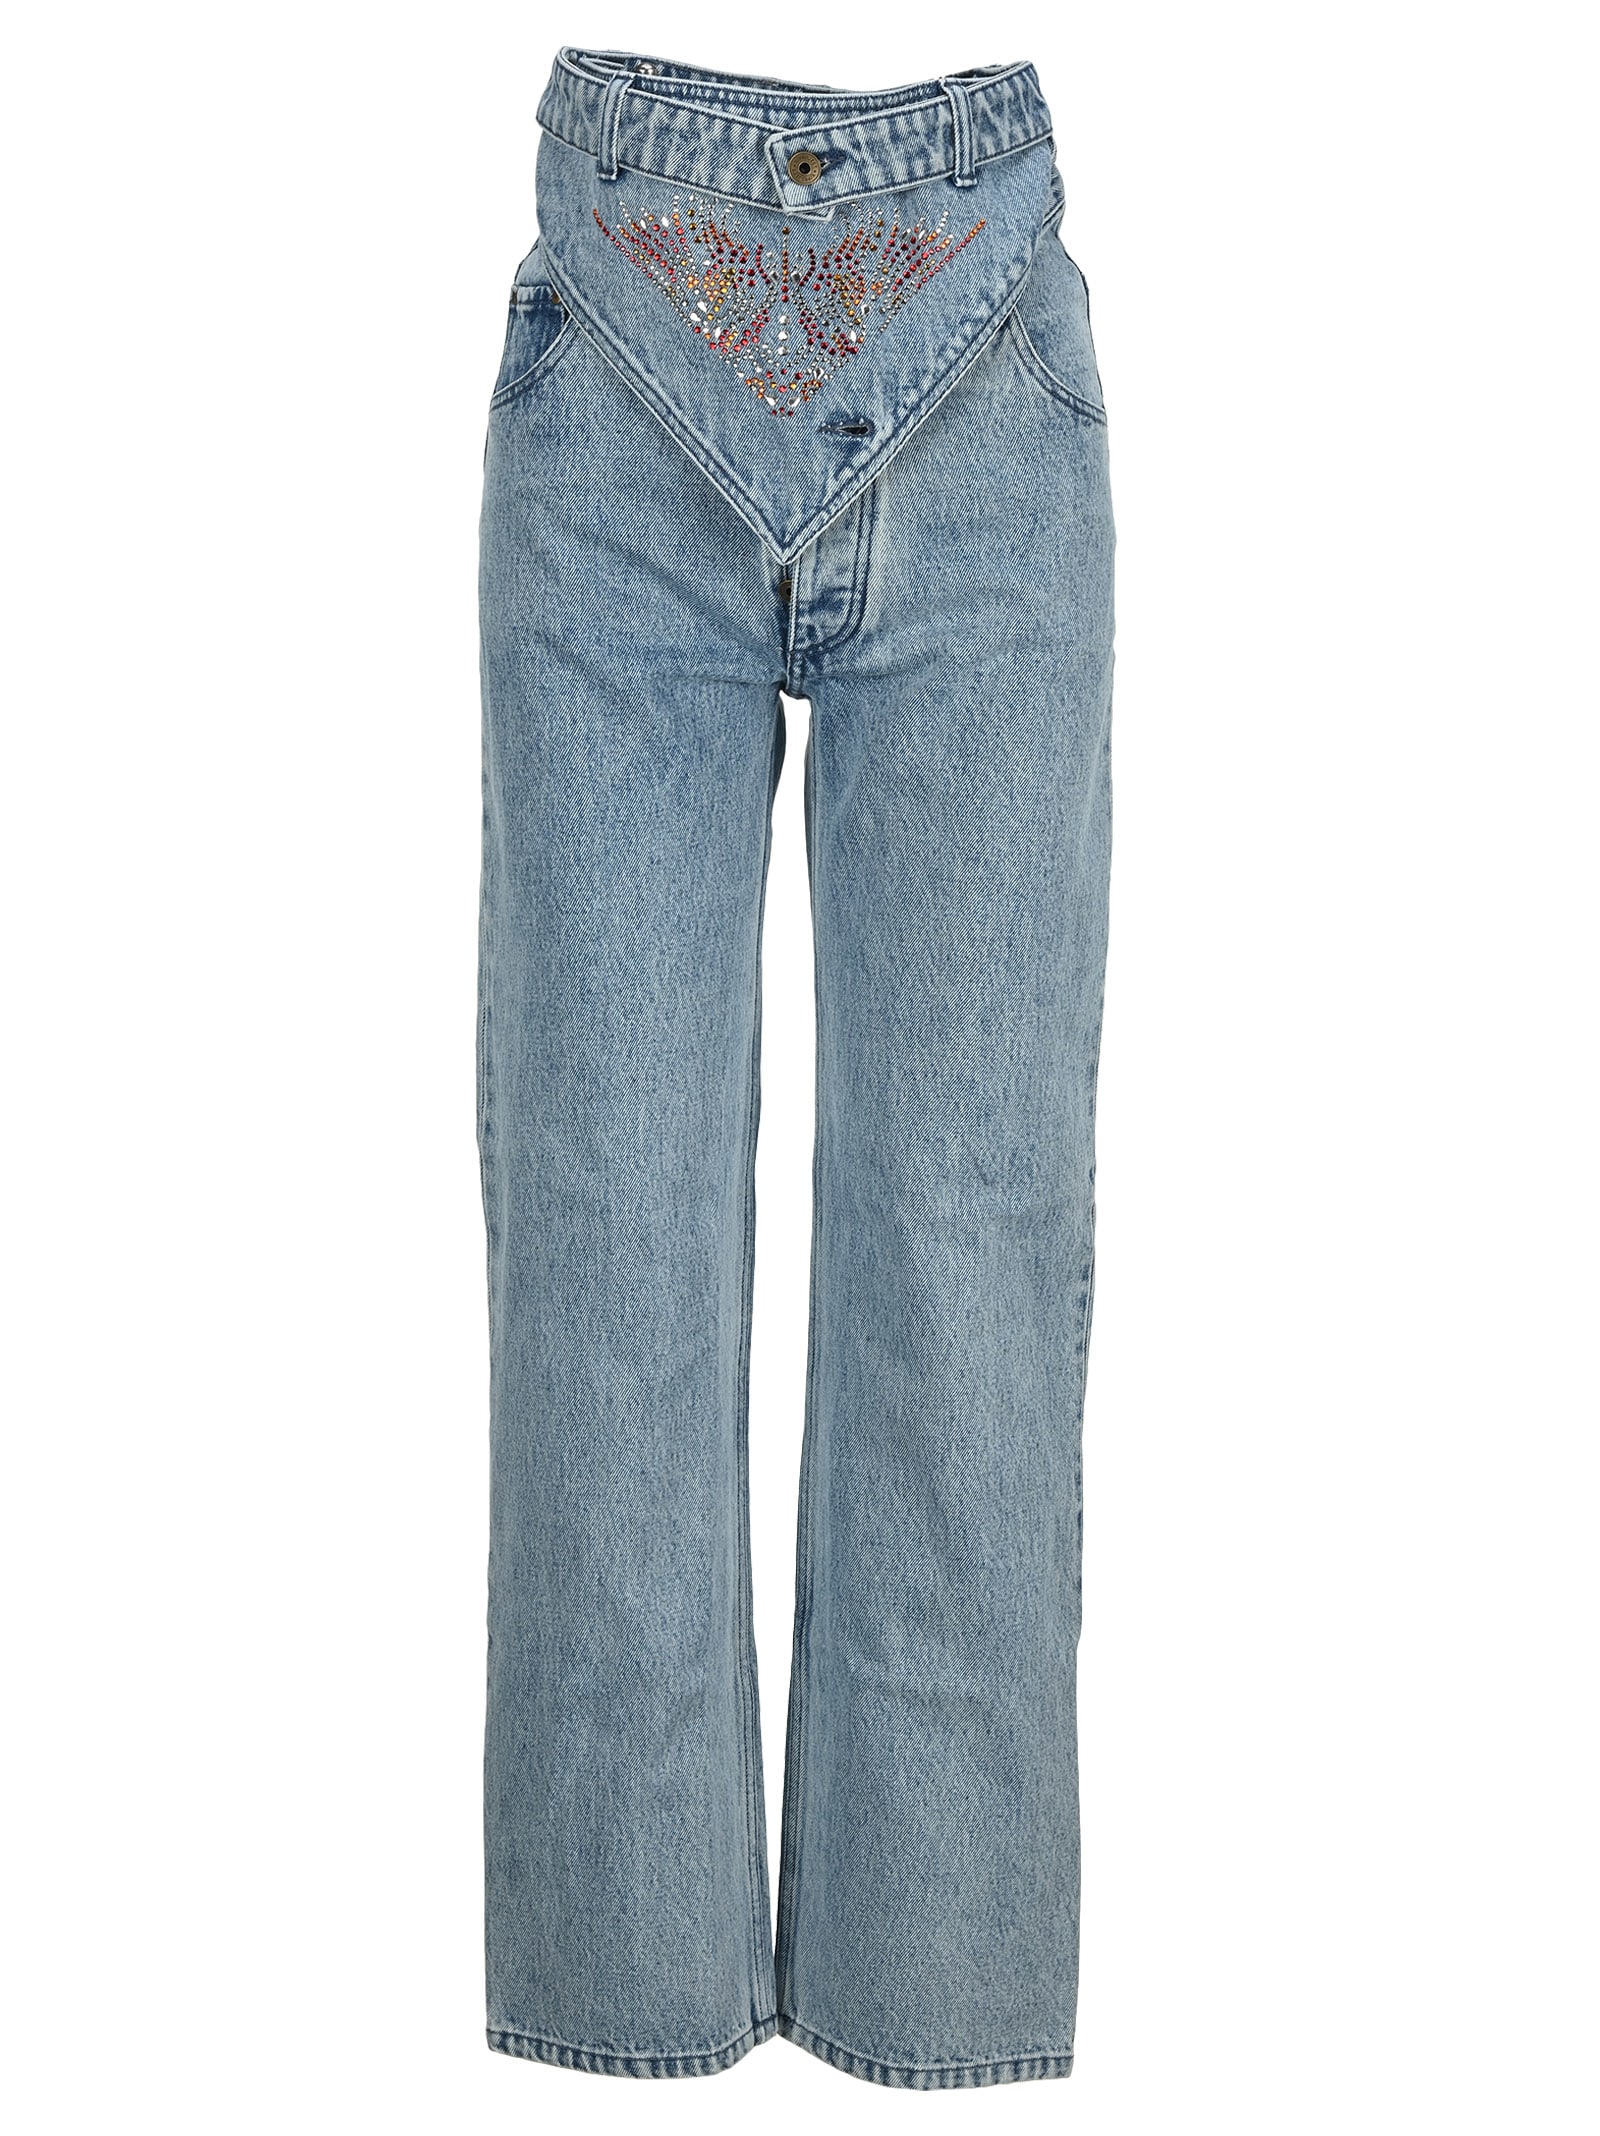 Y/PROJECT Y/PROJECT RHINSTONE EMBELLISHED STRAIGHT JEANS,WJEAN31S20D14BLUEDARKGR